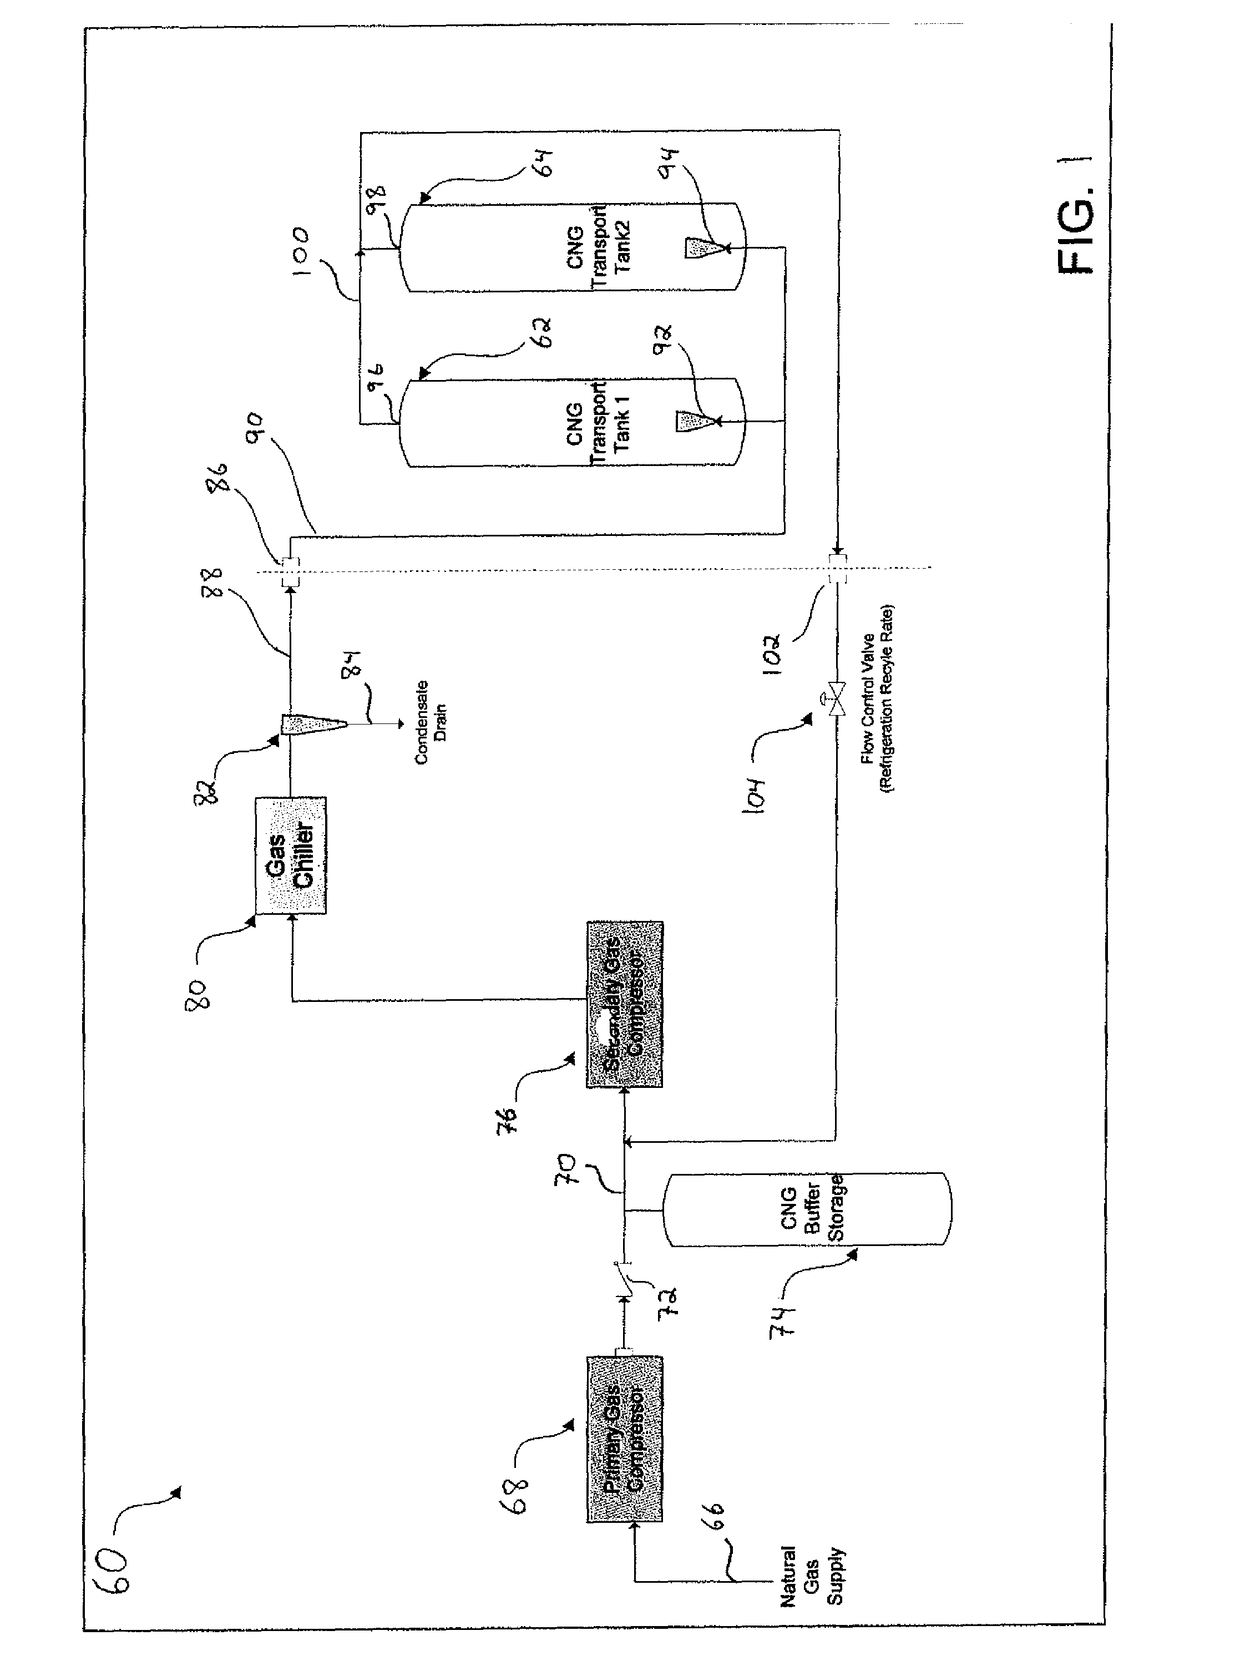 System and method for refuelling a compressed gas pressure vessel using a cooling circuit and in-vessel temperature stratification